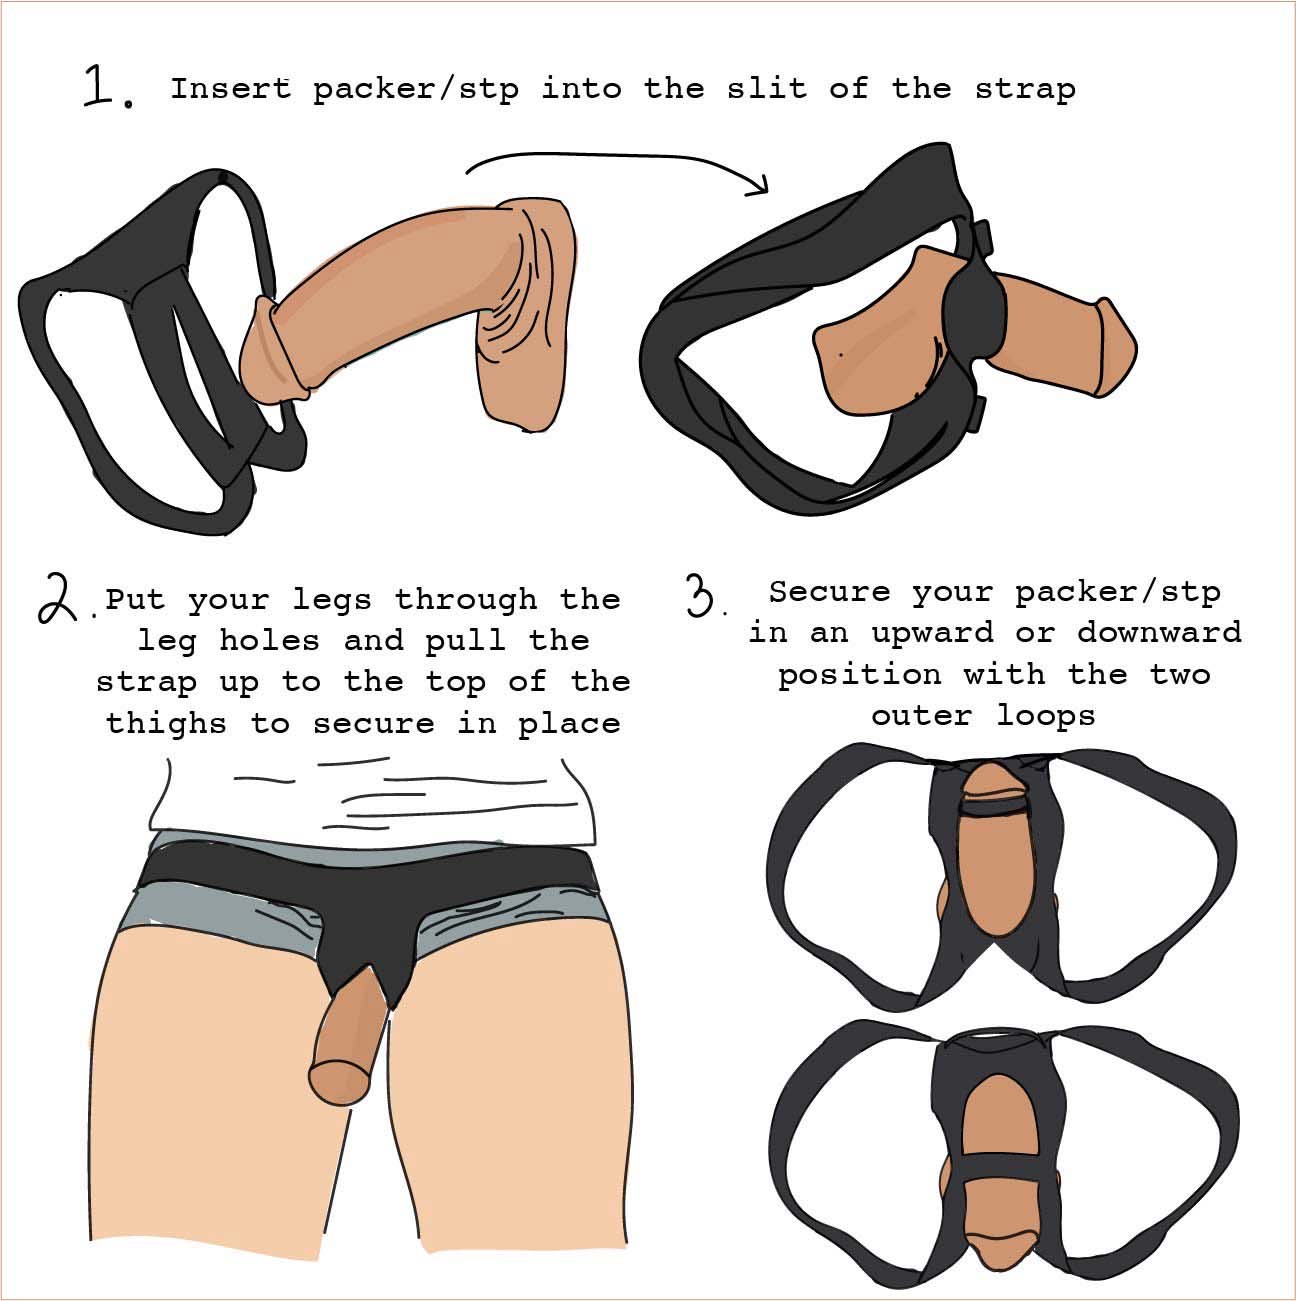 Directions for putting a STP packer into an STP strap.